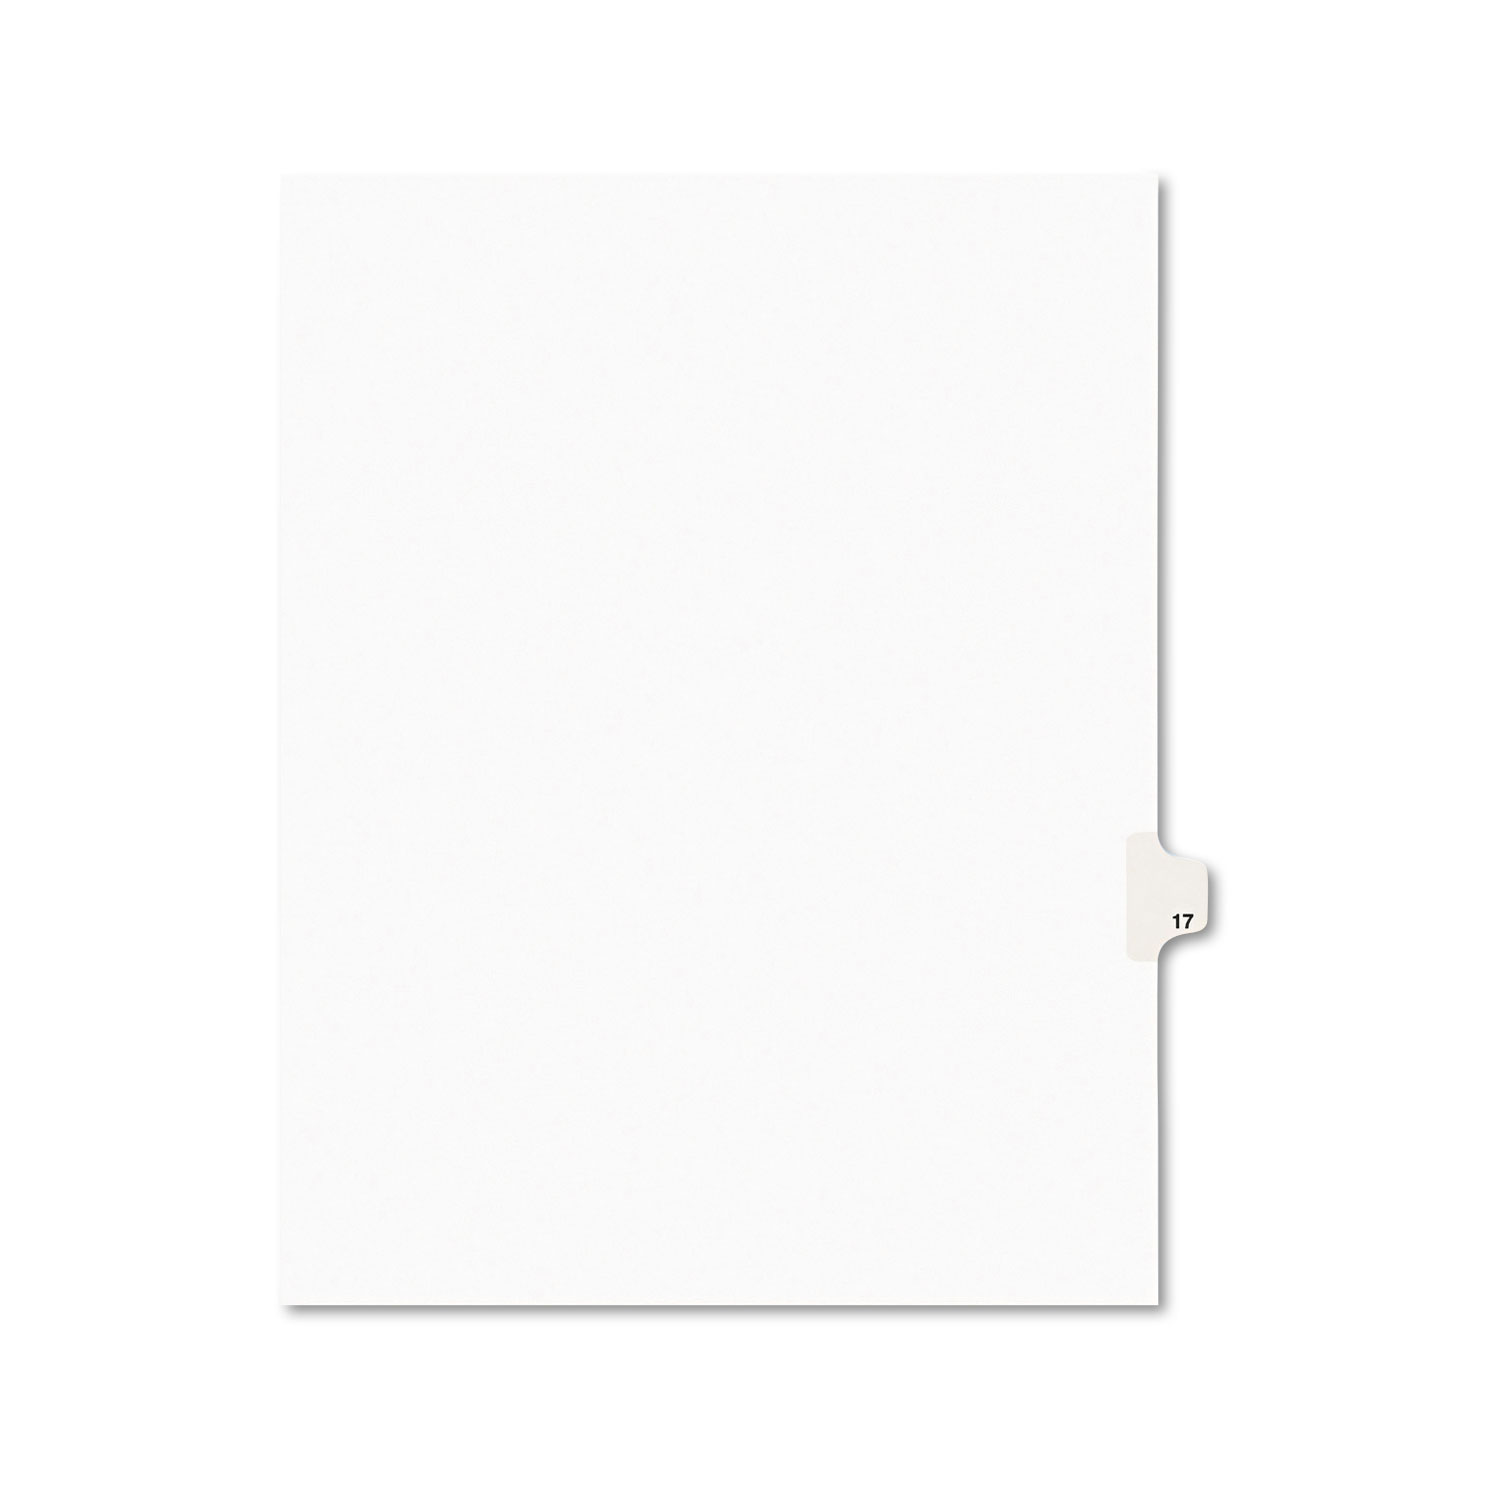  Avery 01017 Preprinted Legal Exhibit Side Tab Index Dividers, Avery Style, 10-Tab, 17, 11 x 8.5, White, 25/Pack (AVE01017) 